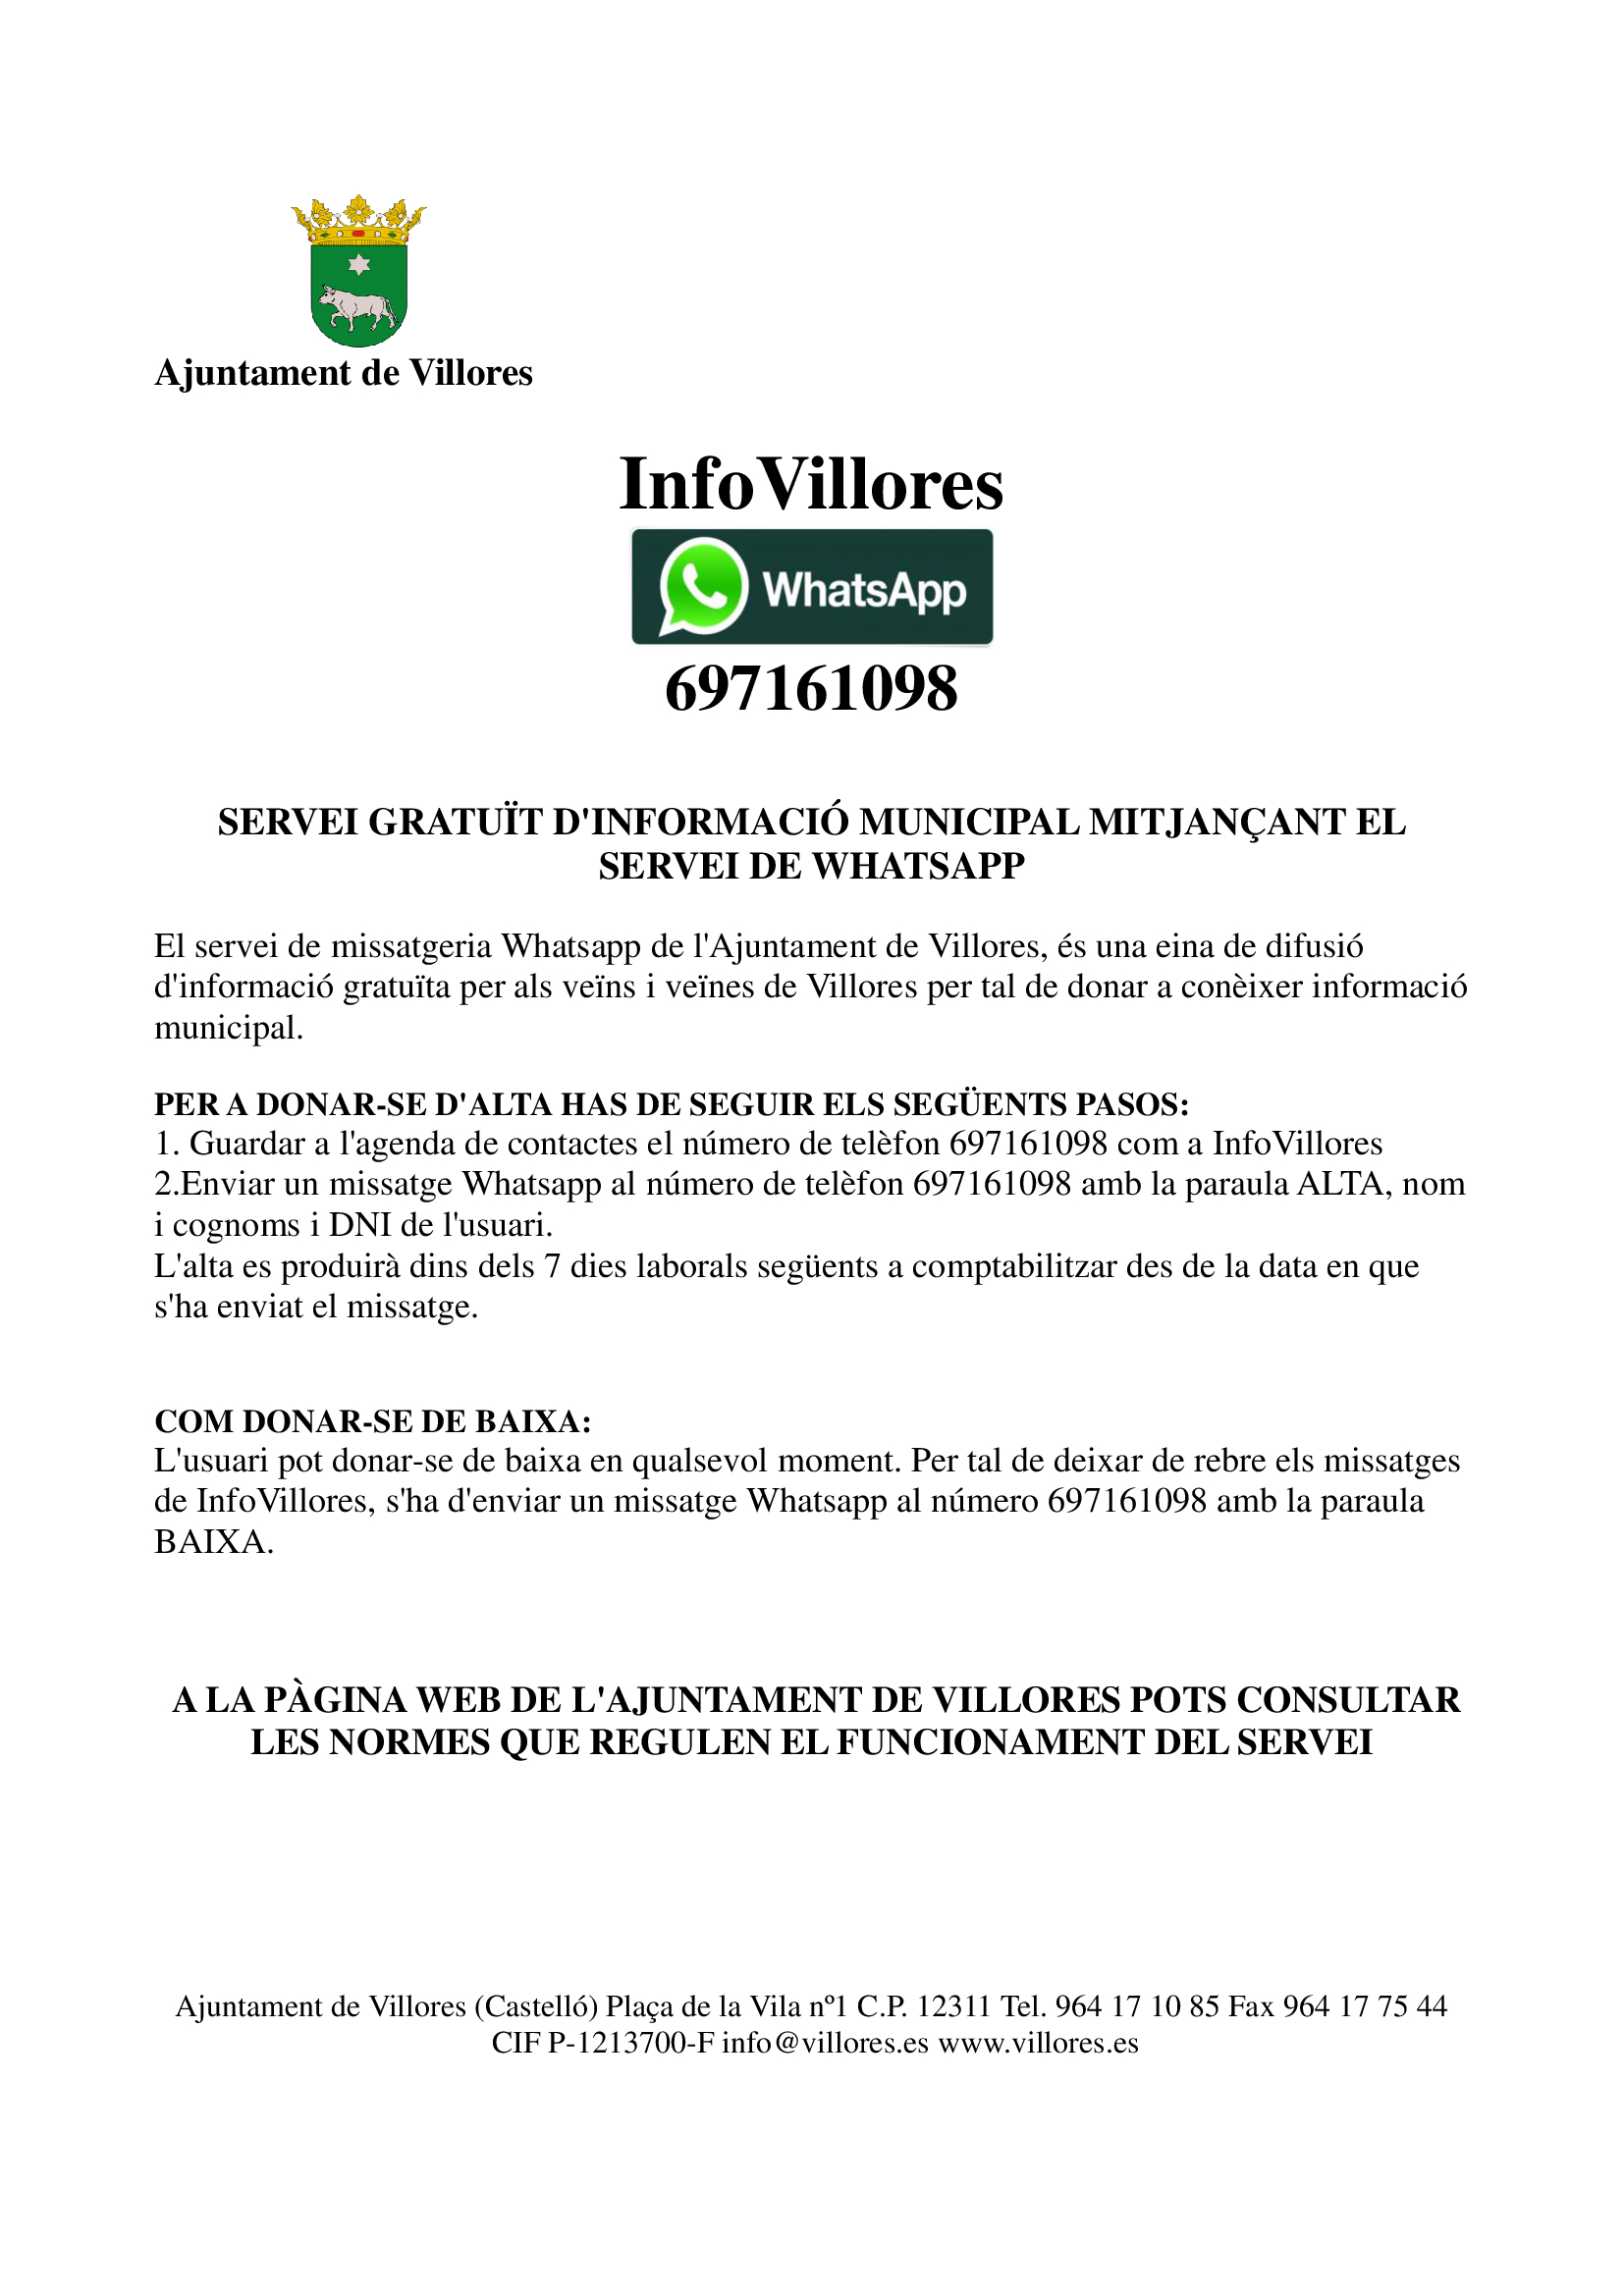 InfoVillores